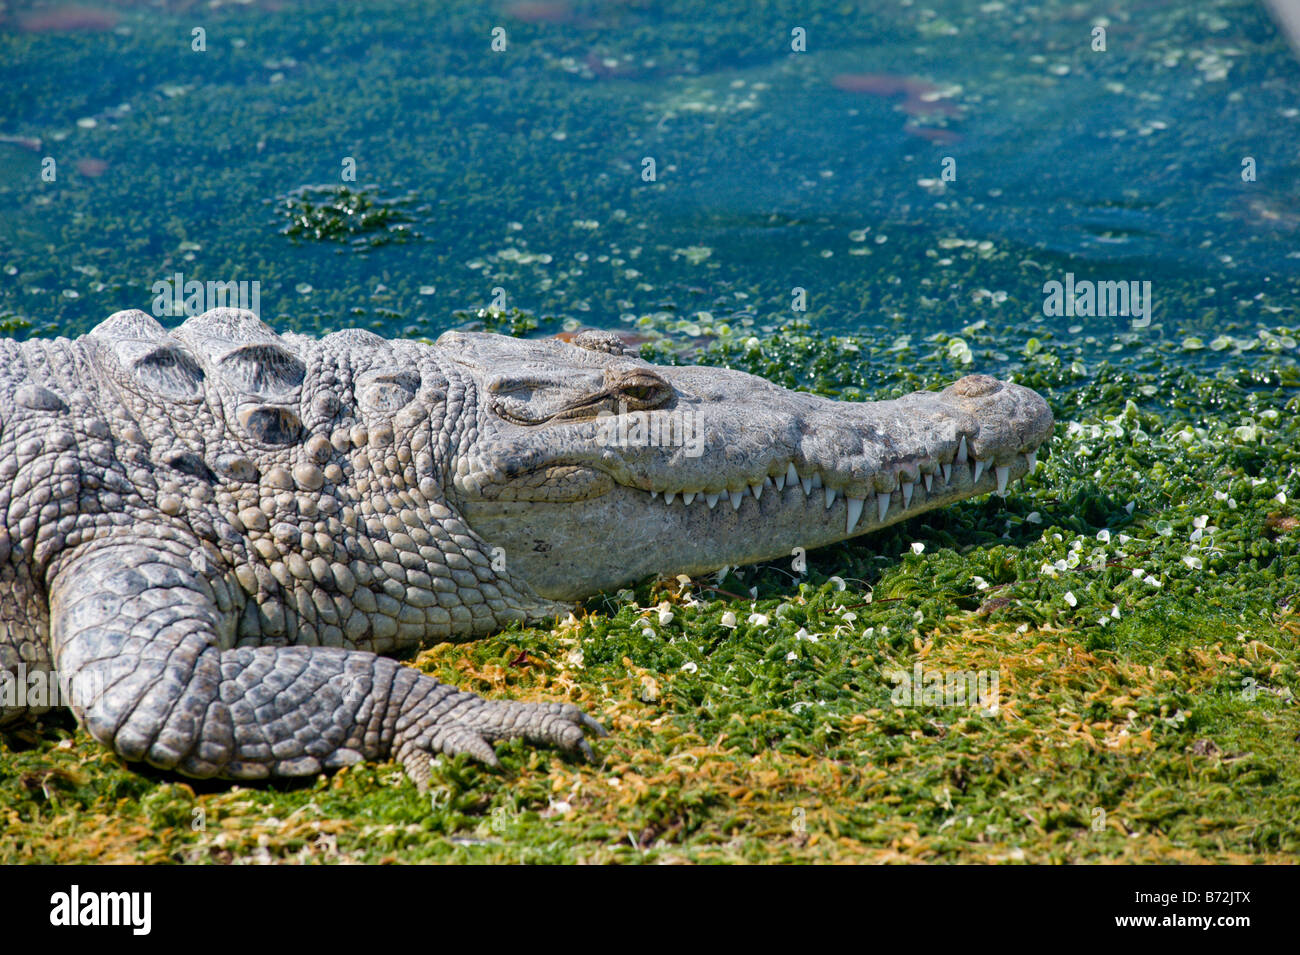 Crocodile laying on boat ramp in Cancun Mexico On the lagoon side Stock Photo